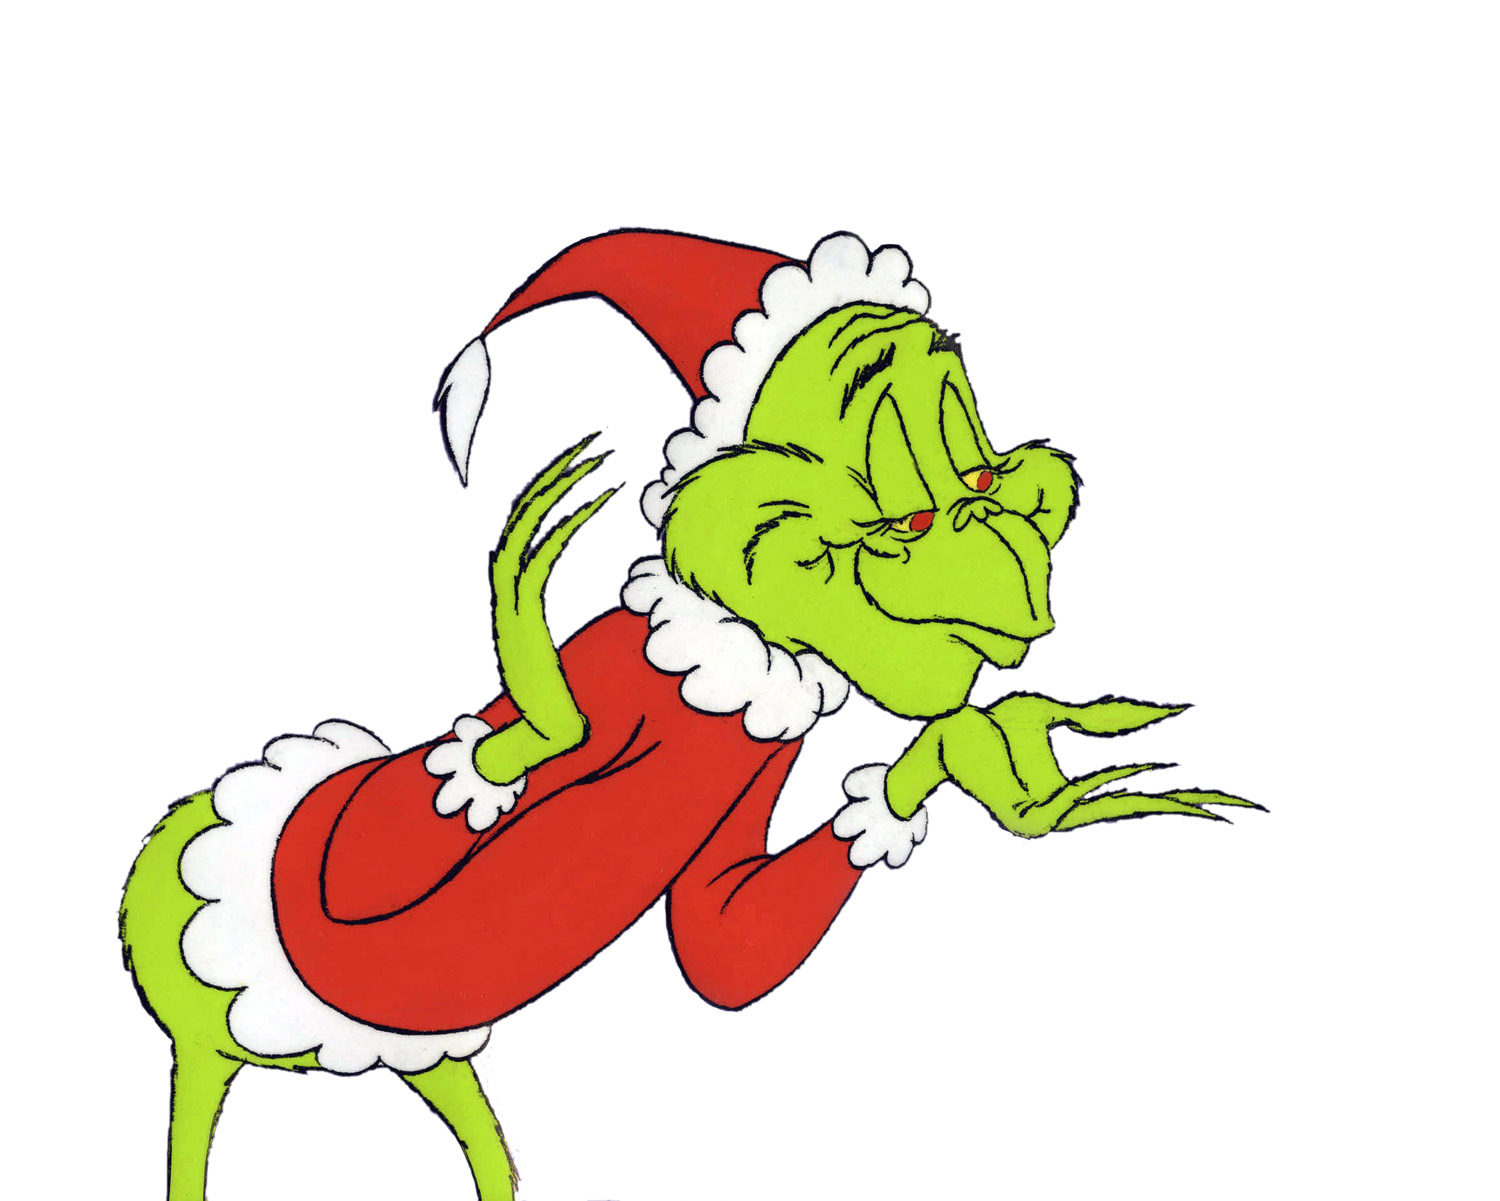 Pix For u0026gt; The Grinch Who Stole .